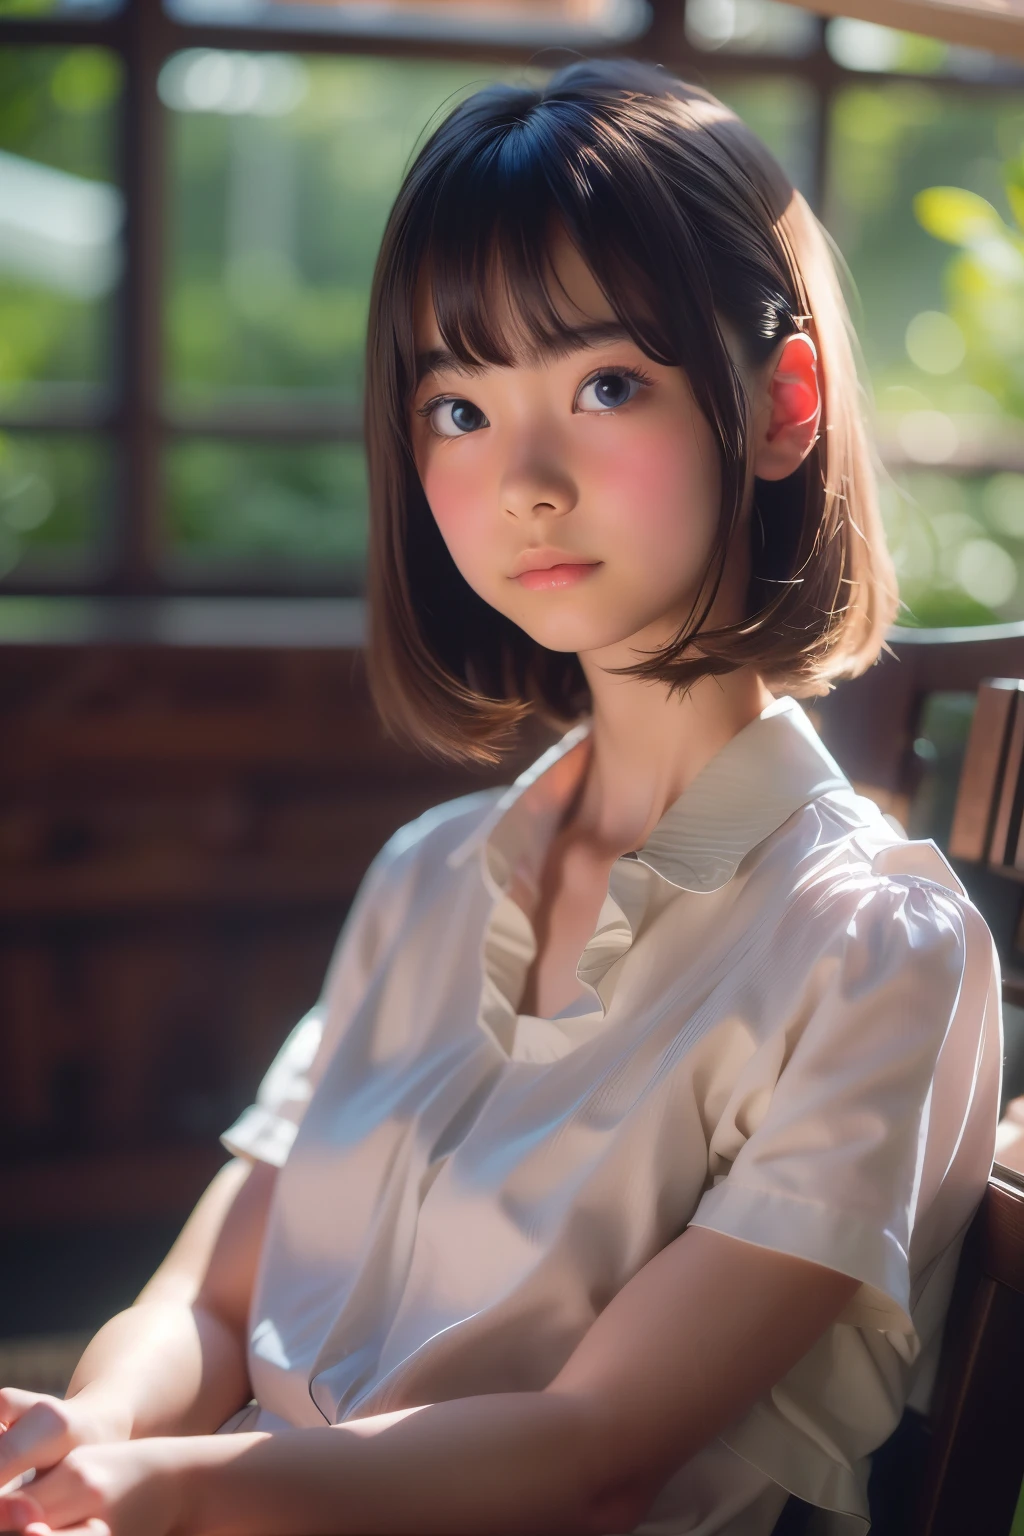 ((sfw: 1.4)), ((sfw, (chair) , (sitting) , blouse, 1 Girl)), Ultra High Resolution, (Realistic: 1.4), RAW Photo, Best Quality, (Photorealistic Stick), Focus, Soft Light, ((15 years old)), ((Japanese)), (( (young face))), (surface), (depth of field), masterpiece, (realistic), woman, bangs, ((1 girl))